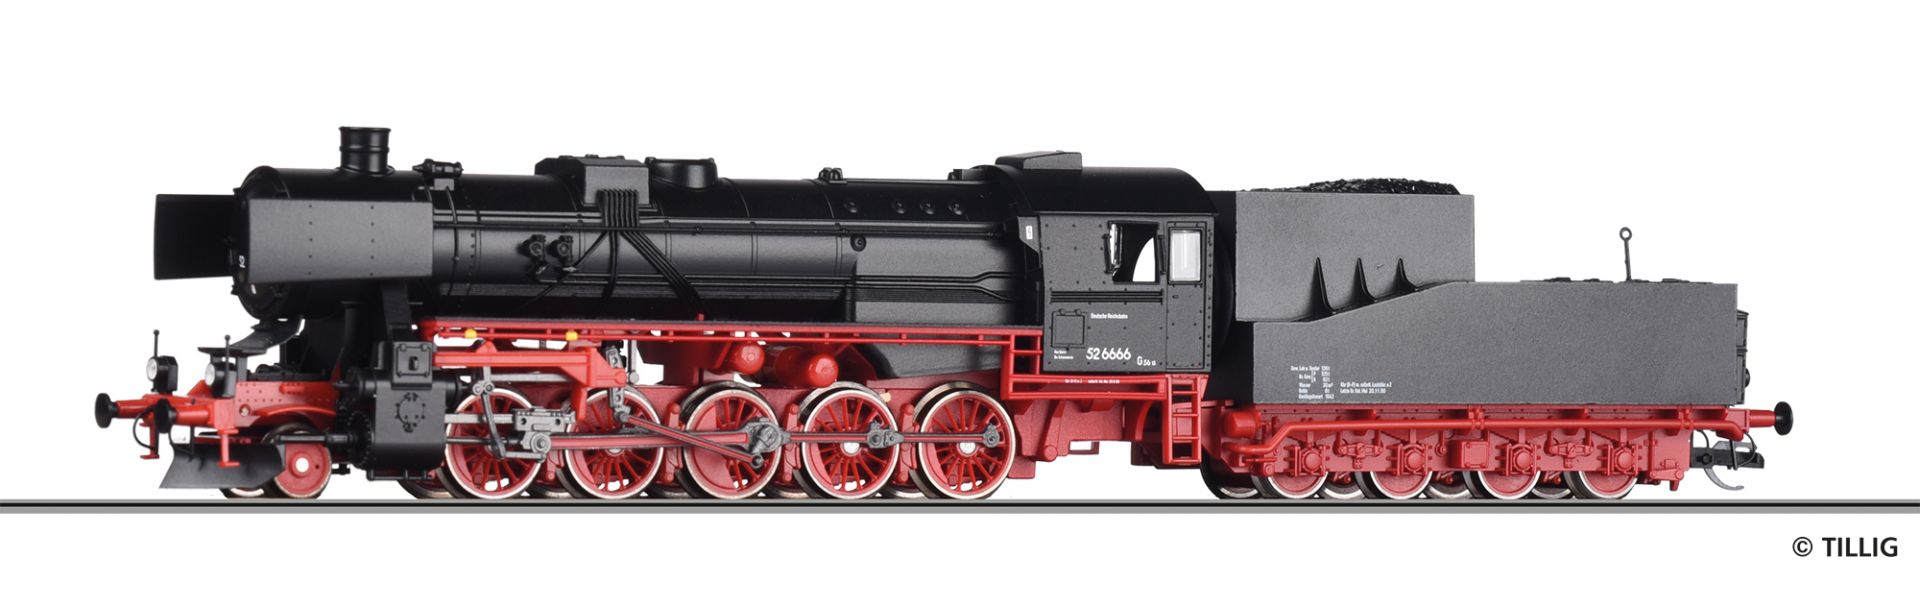 502393 | Steam locomotive Museum -sold out-